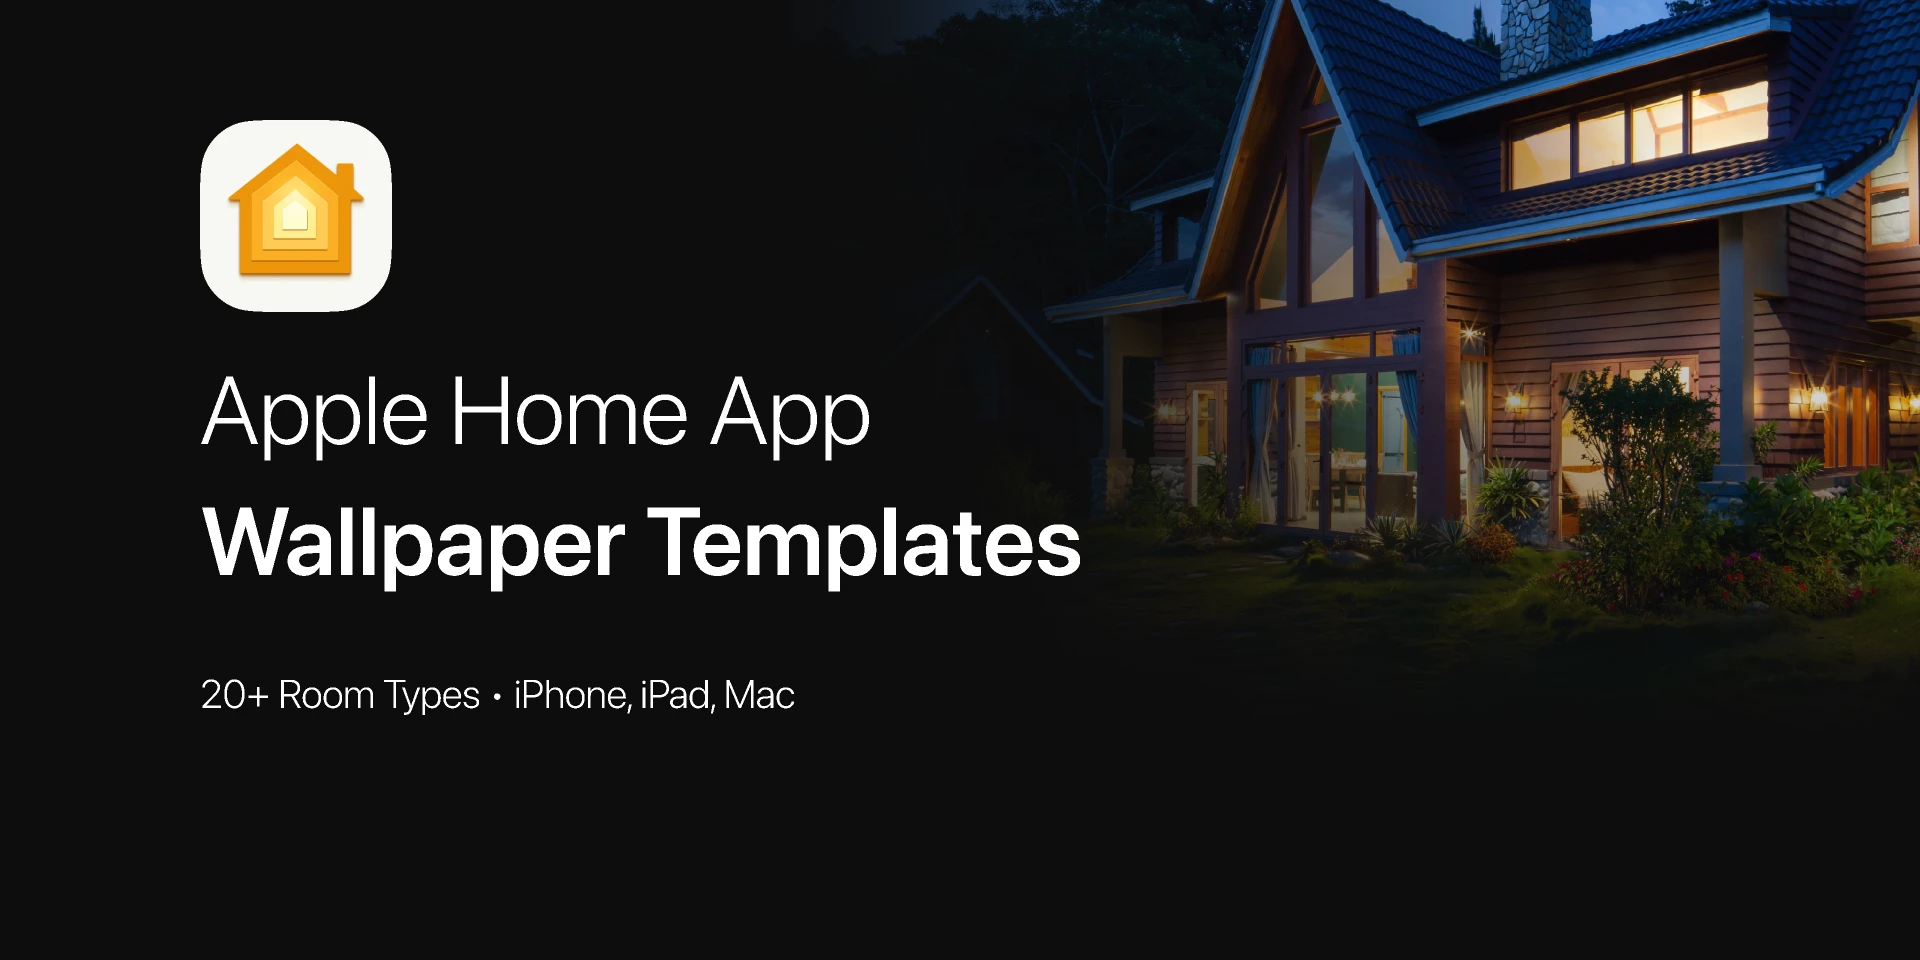 Apple Home App Wallpaper Templates for Figma and Adobe XD